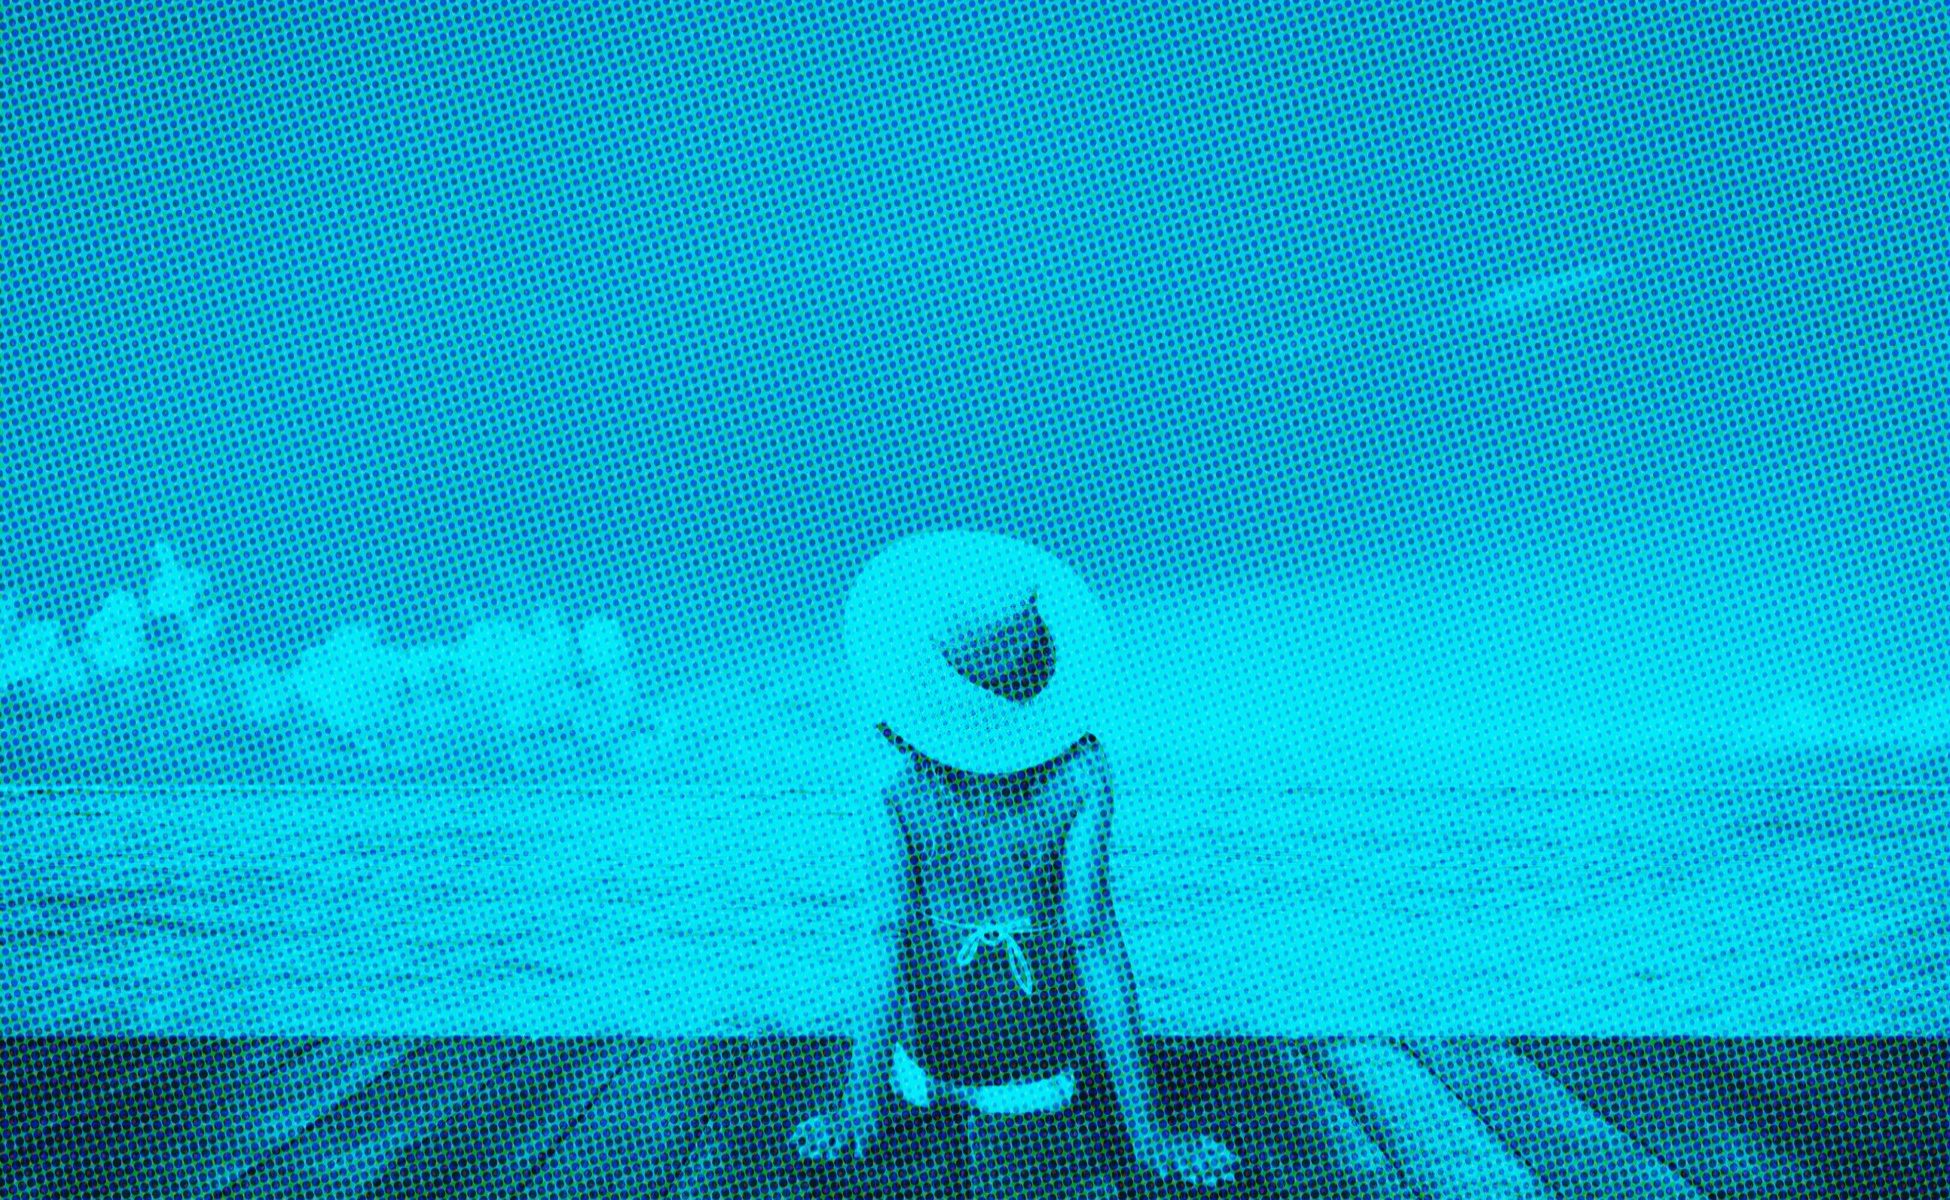 digitized image of woman relaxing on beach dock